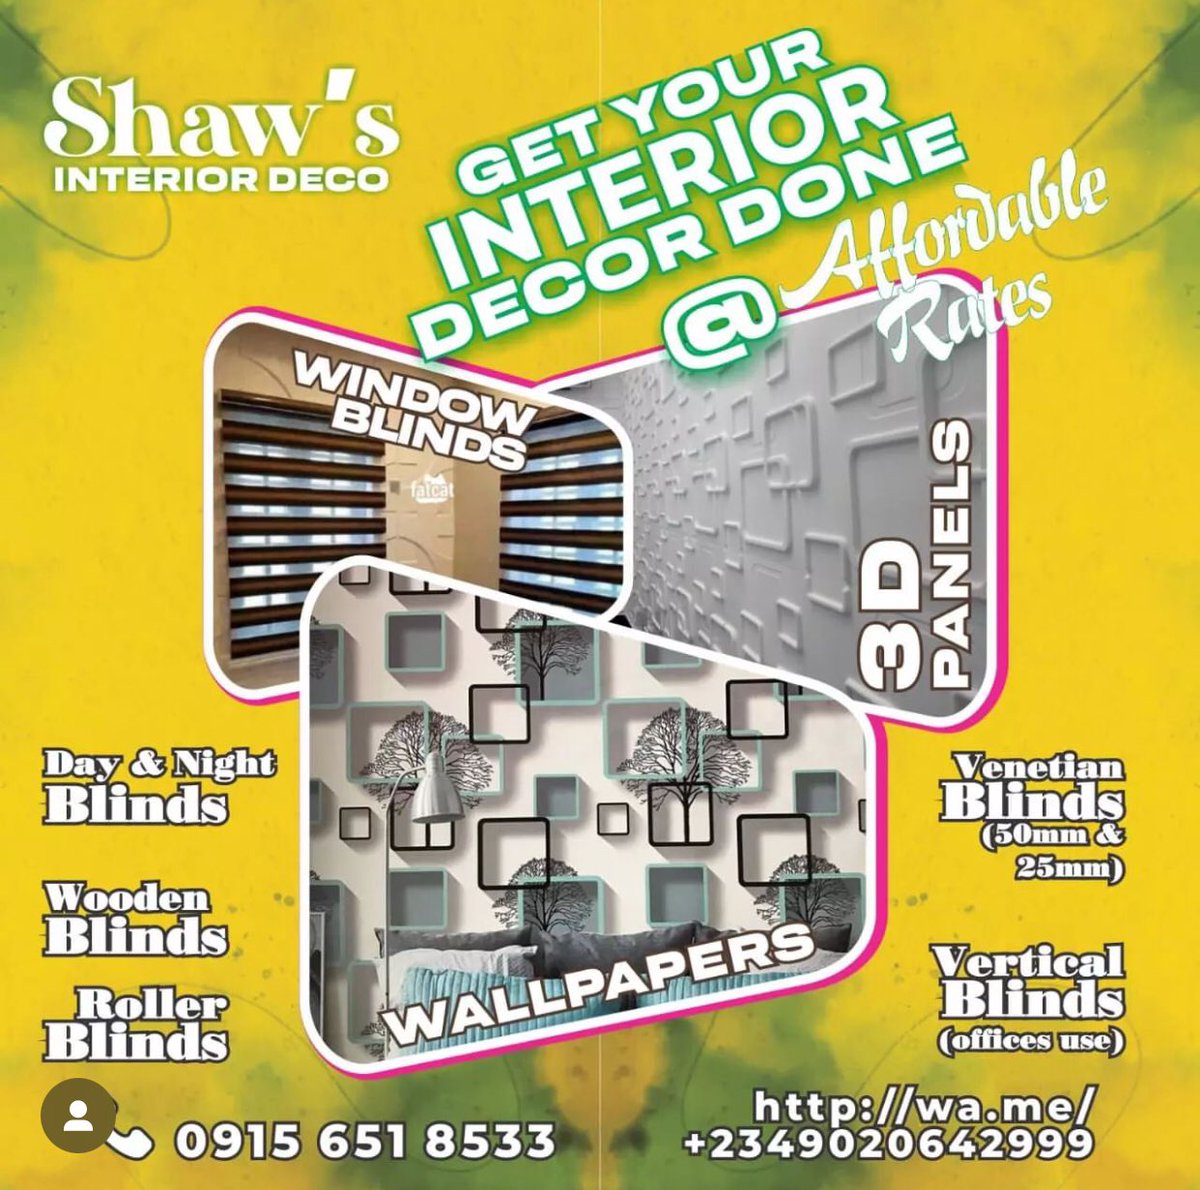 SHAWS INTERIOR DECOR 
We are open for business 💼
Let's be your Homes & Offices window blinds & Curtains plug 🔌 

SPECIALIZED IN PRODUCTION OF WINDOW BLINDS 
👉🏾 #dayandnightblinds 

👉🏾 #venetianblinds 

👉🏾 #verticalblinds 

👉🏾 #rollerblinds 

👉🏾 #woodenblinds 

👉🏾 #romanblinds